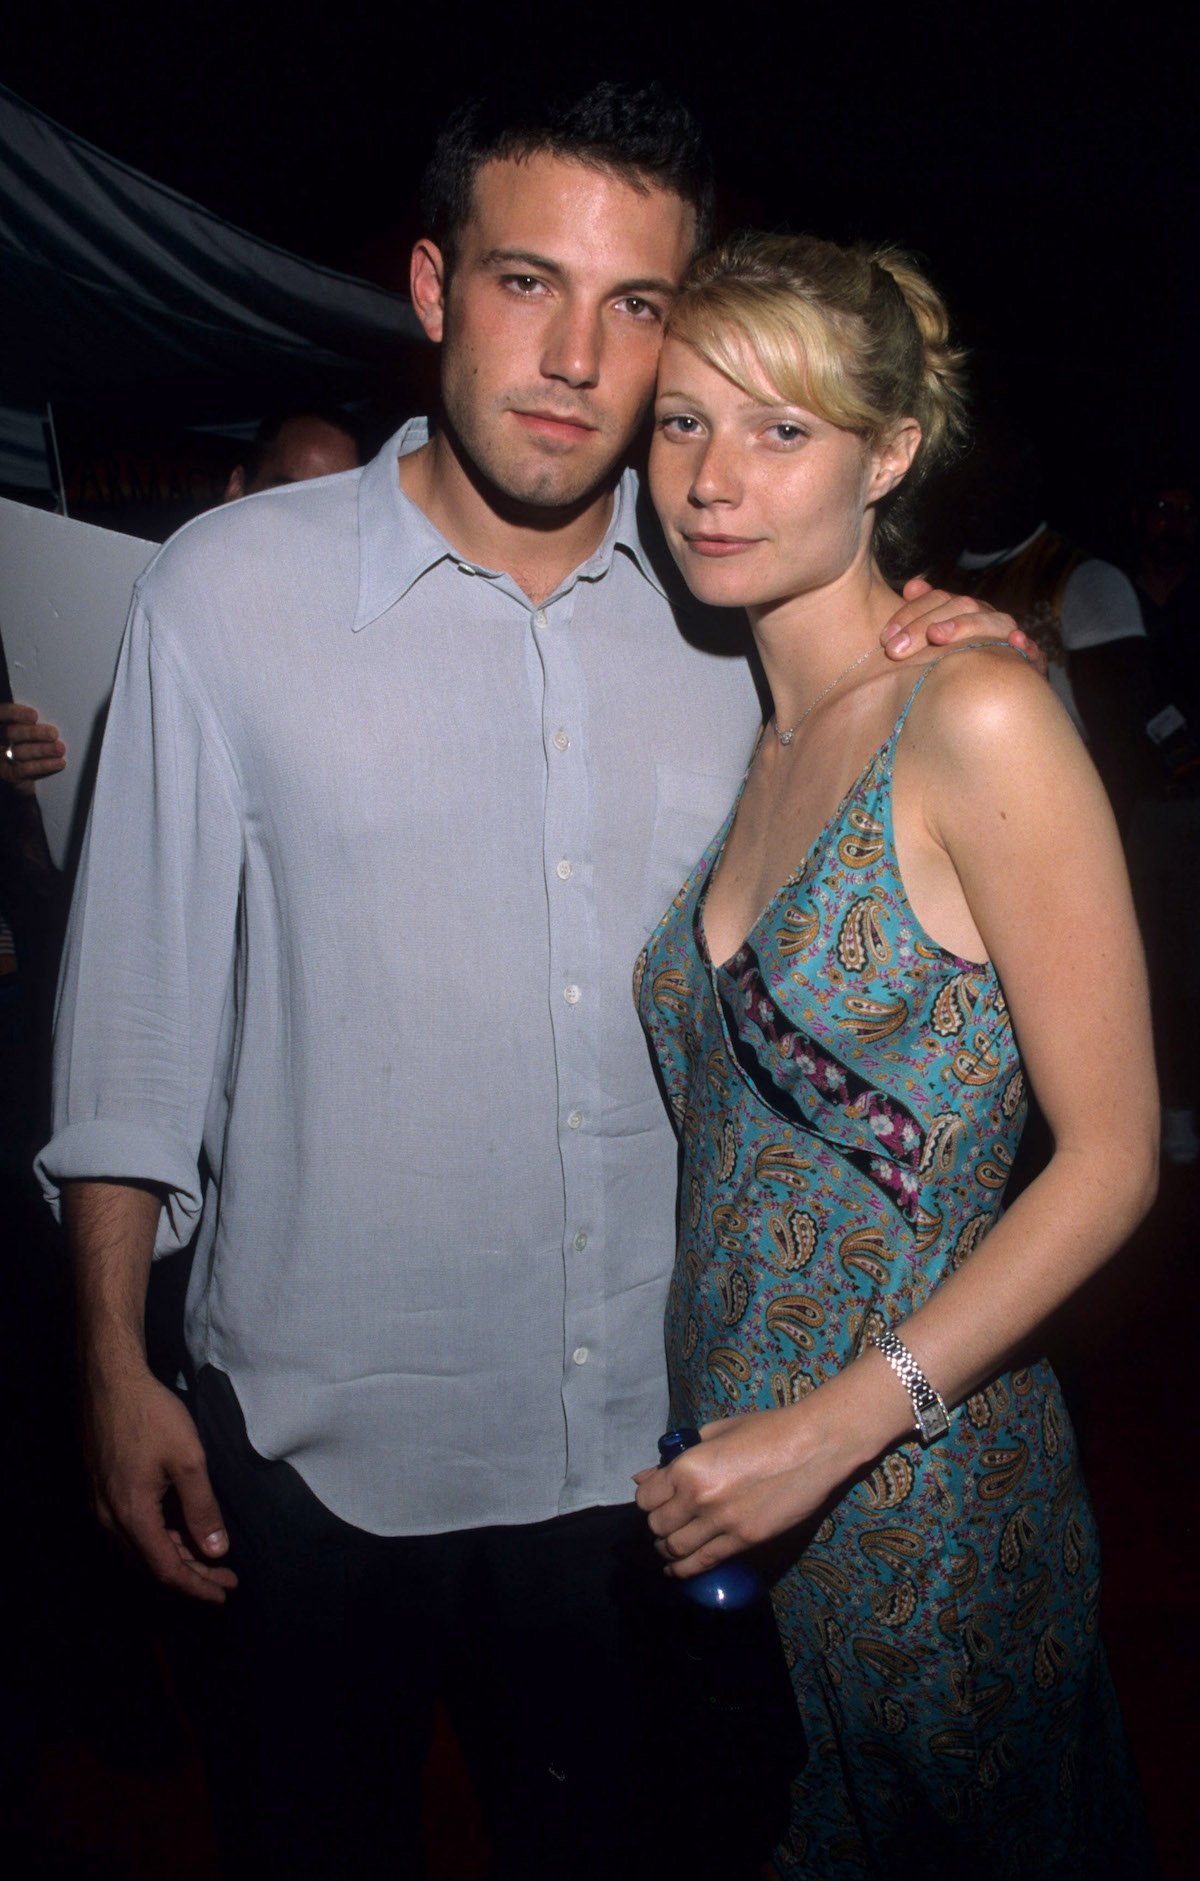 Ben Affleck with his arm around Gwyneth Paltrow at the premiere of 'Armageddon'